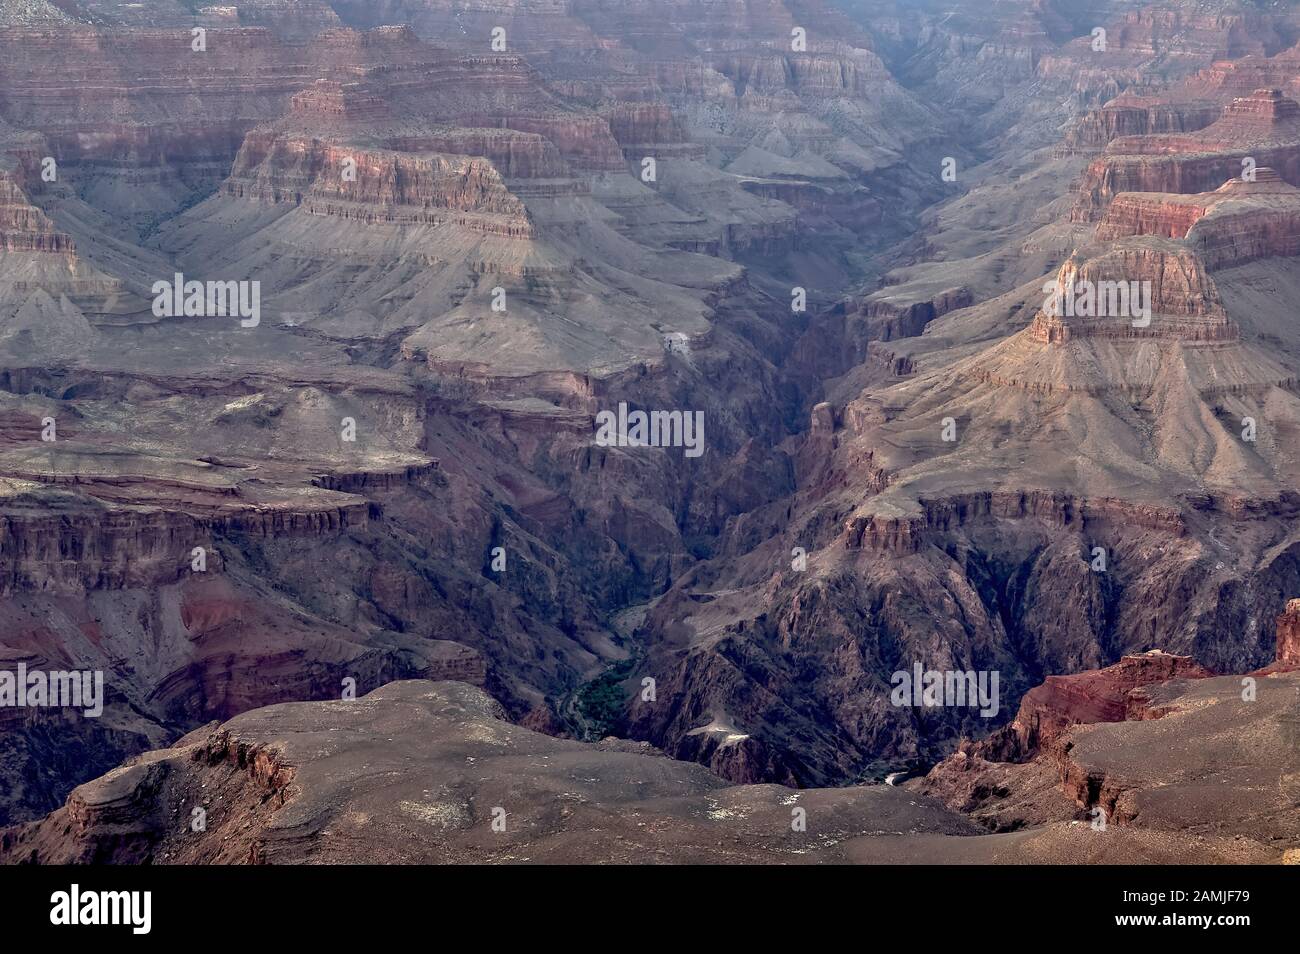 A view of Bright Angel Canyon from the South Rim of the Grand Canyon at Twilight. Stock Photo